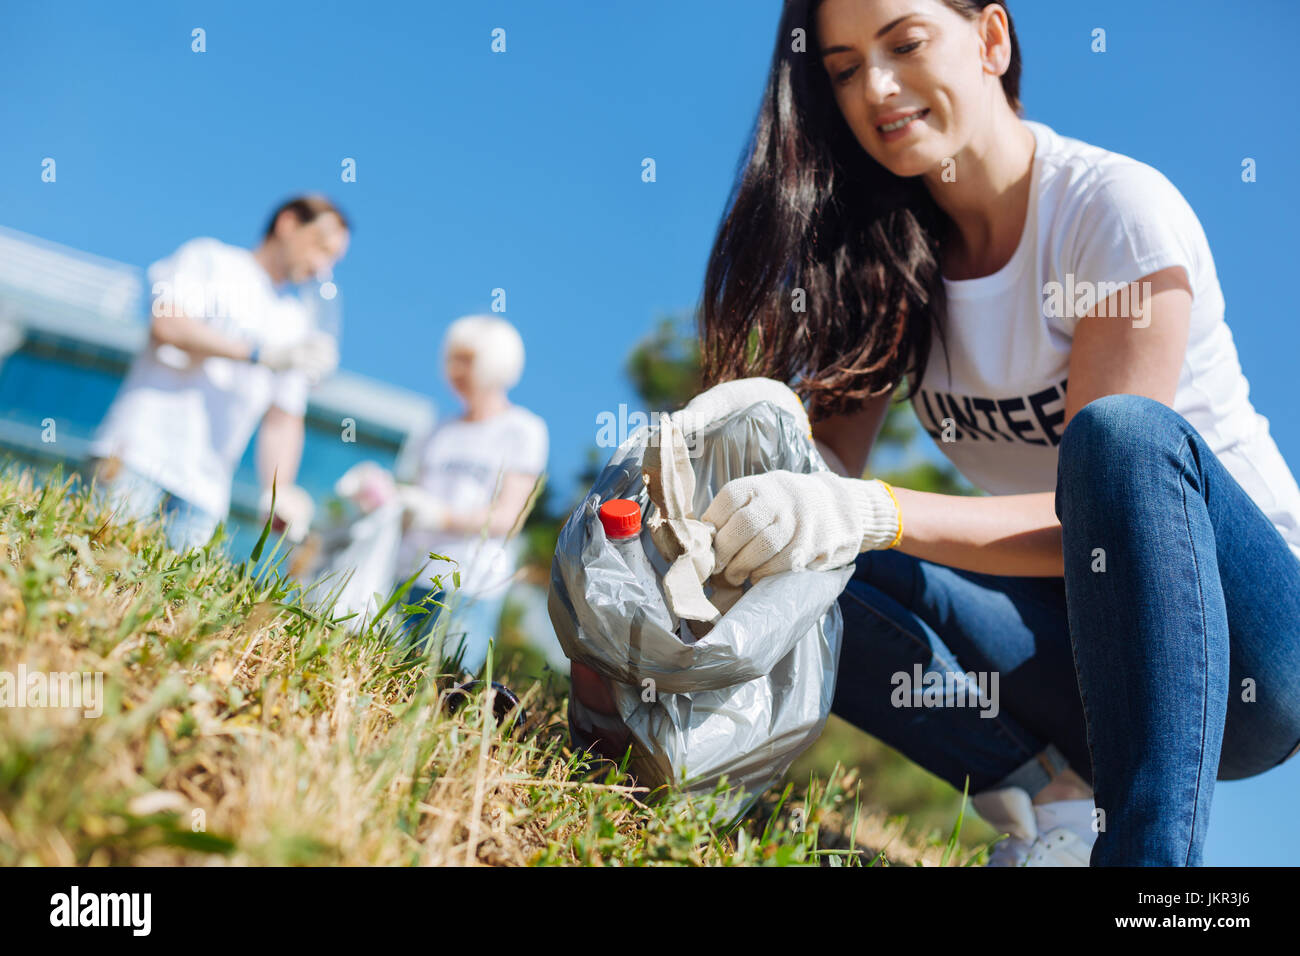 Nice progressive woman making an effort to help the environment Stock Photo